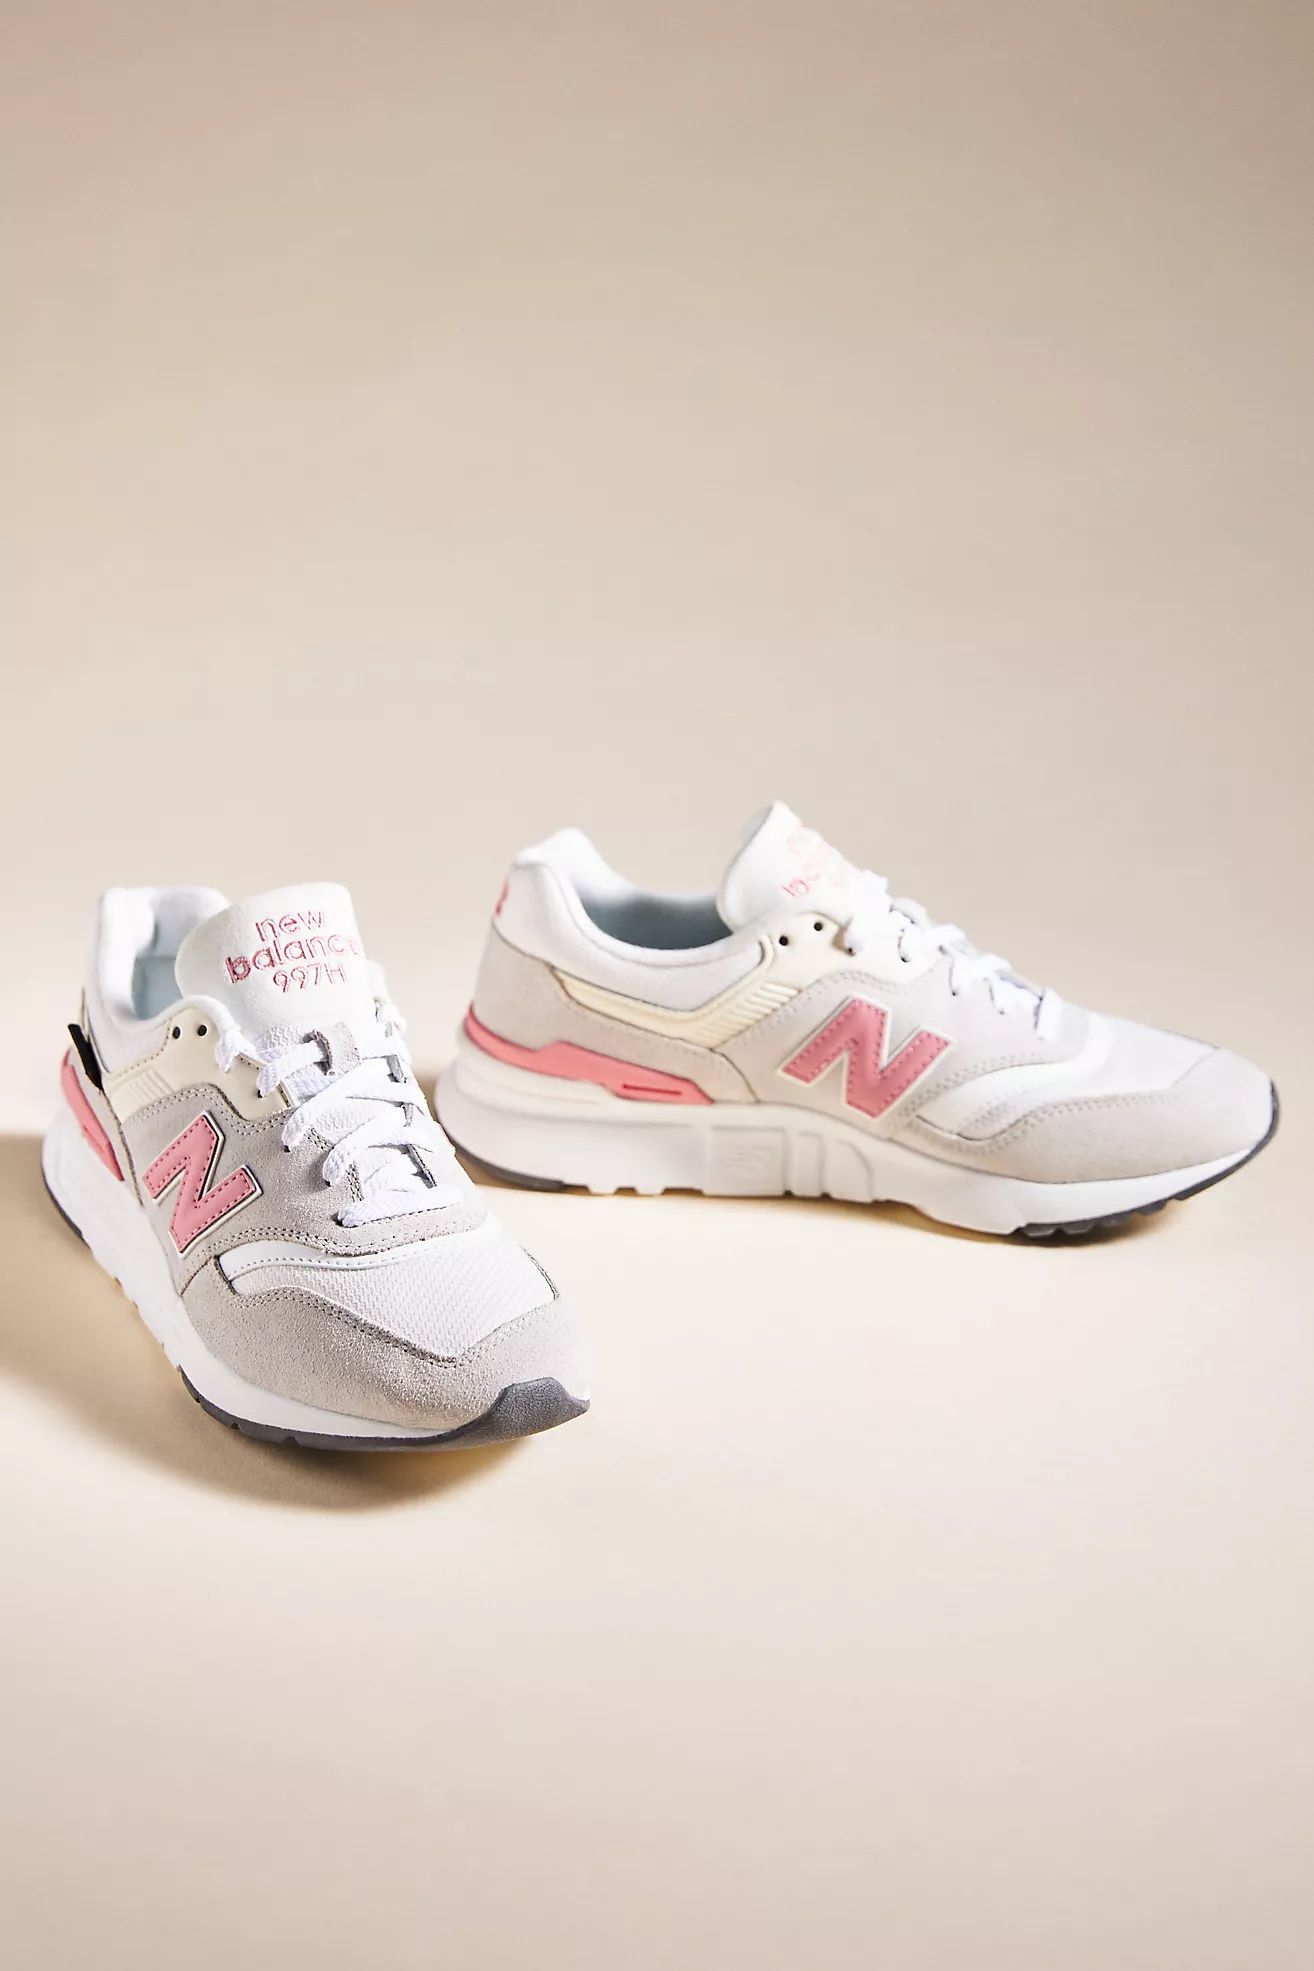 New Balance 997H Sneakers | Anthropologie (US)